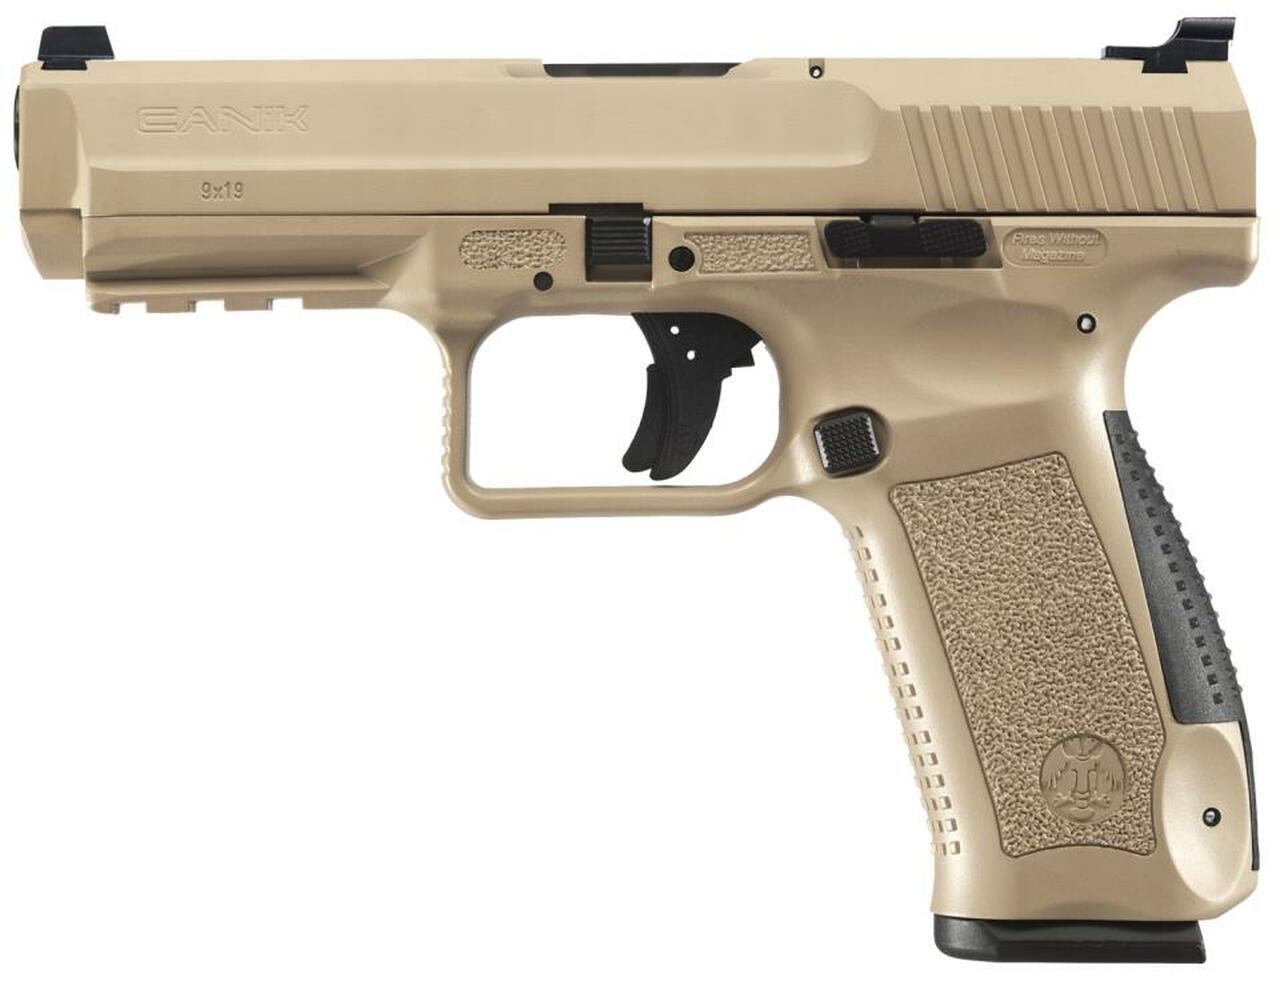 Image of Canik TPPSFF Desert Pistol (Special Forces), Warren Sights, Accessory Kit, 2X18rd Mags 9mm